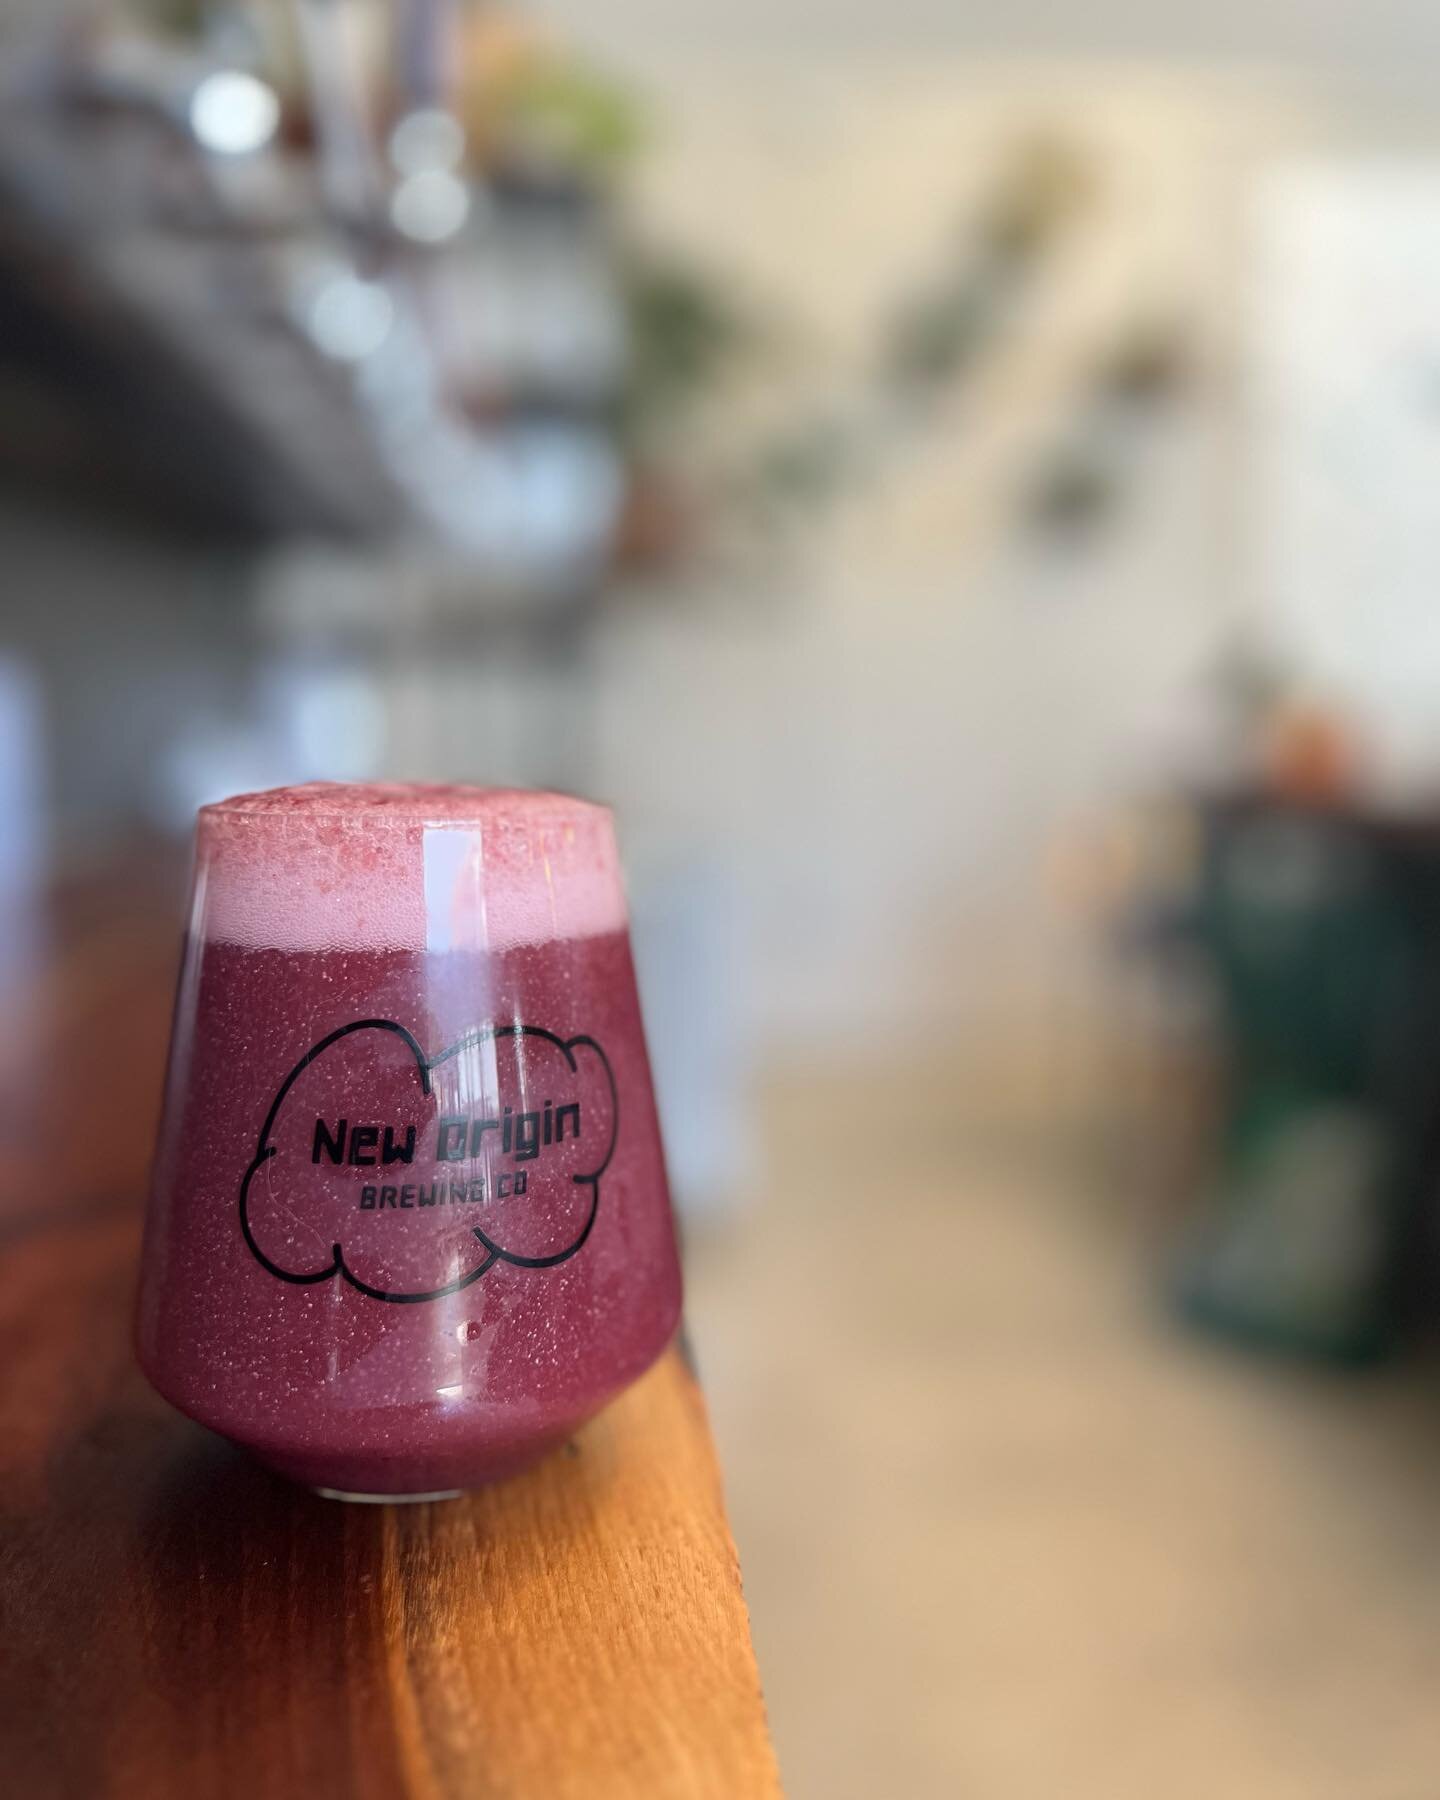 We&rsquo;ve been Jammed 📡 is now on tap! It&rsquo;s also slated for a canning run soon!

We&rsquo;ve been Jammed is a Sour Ale brewed with oats, and conditioned on blackberry, raspberry, and lactose free vanilla ice cream.